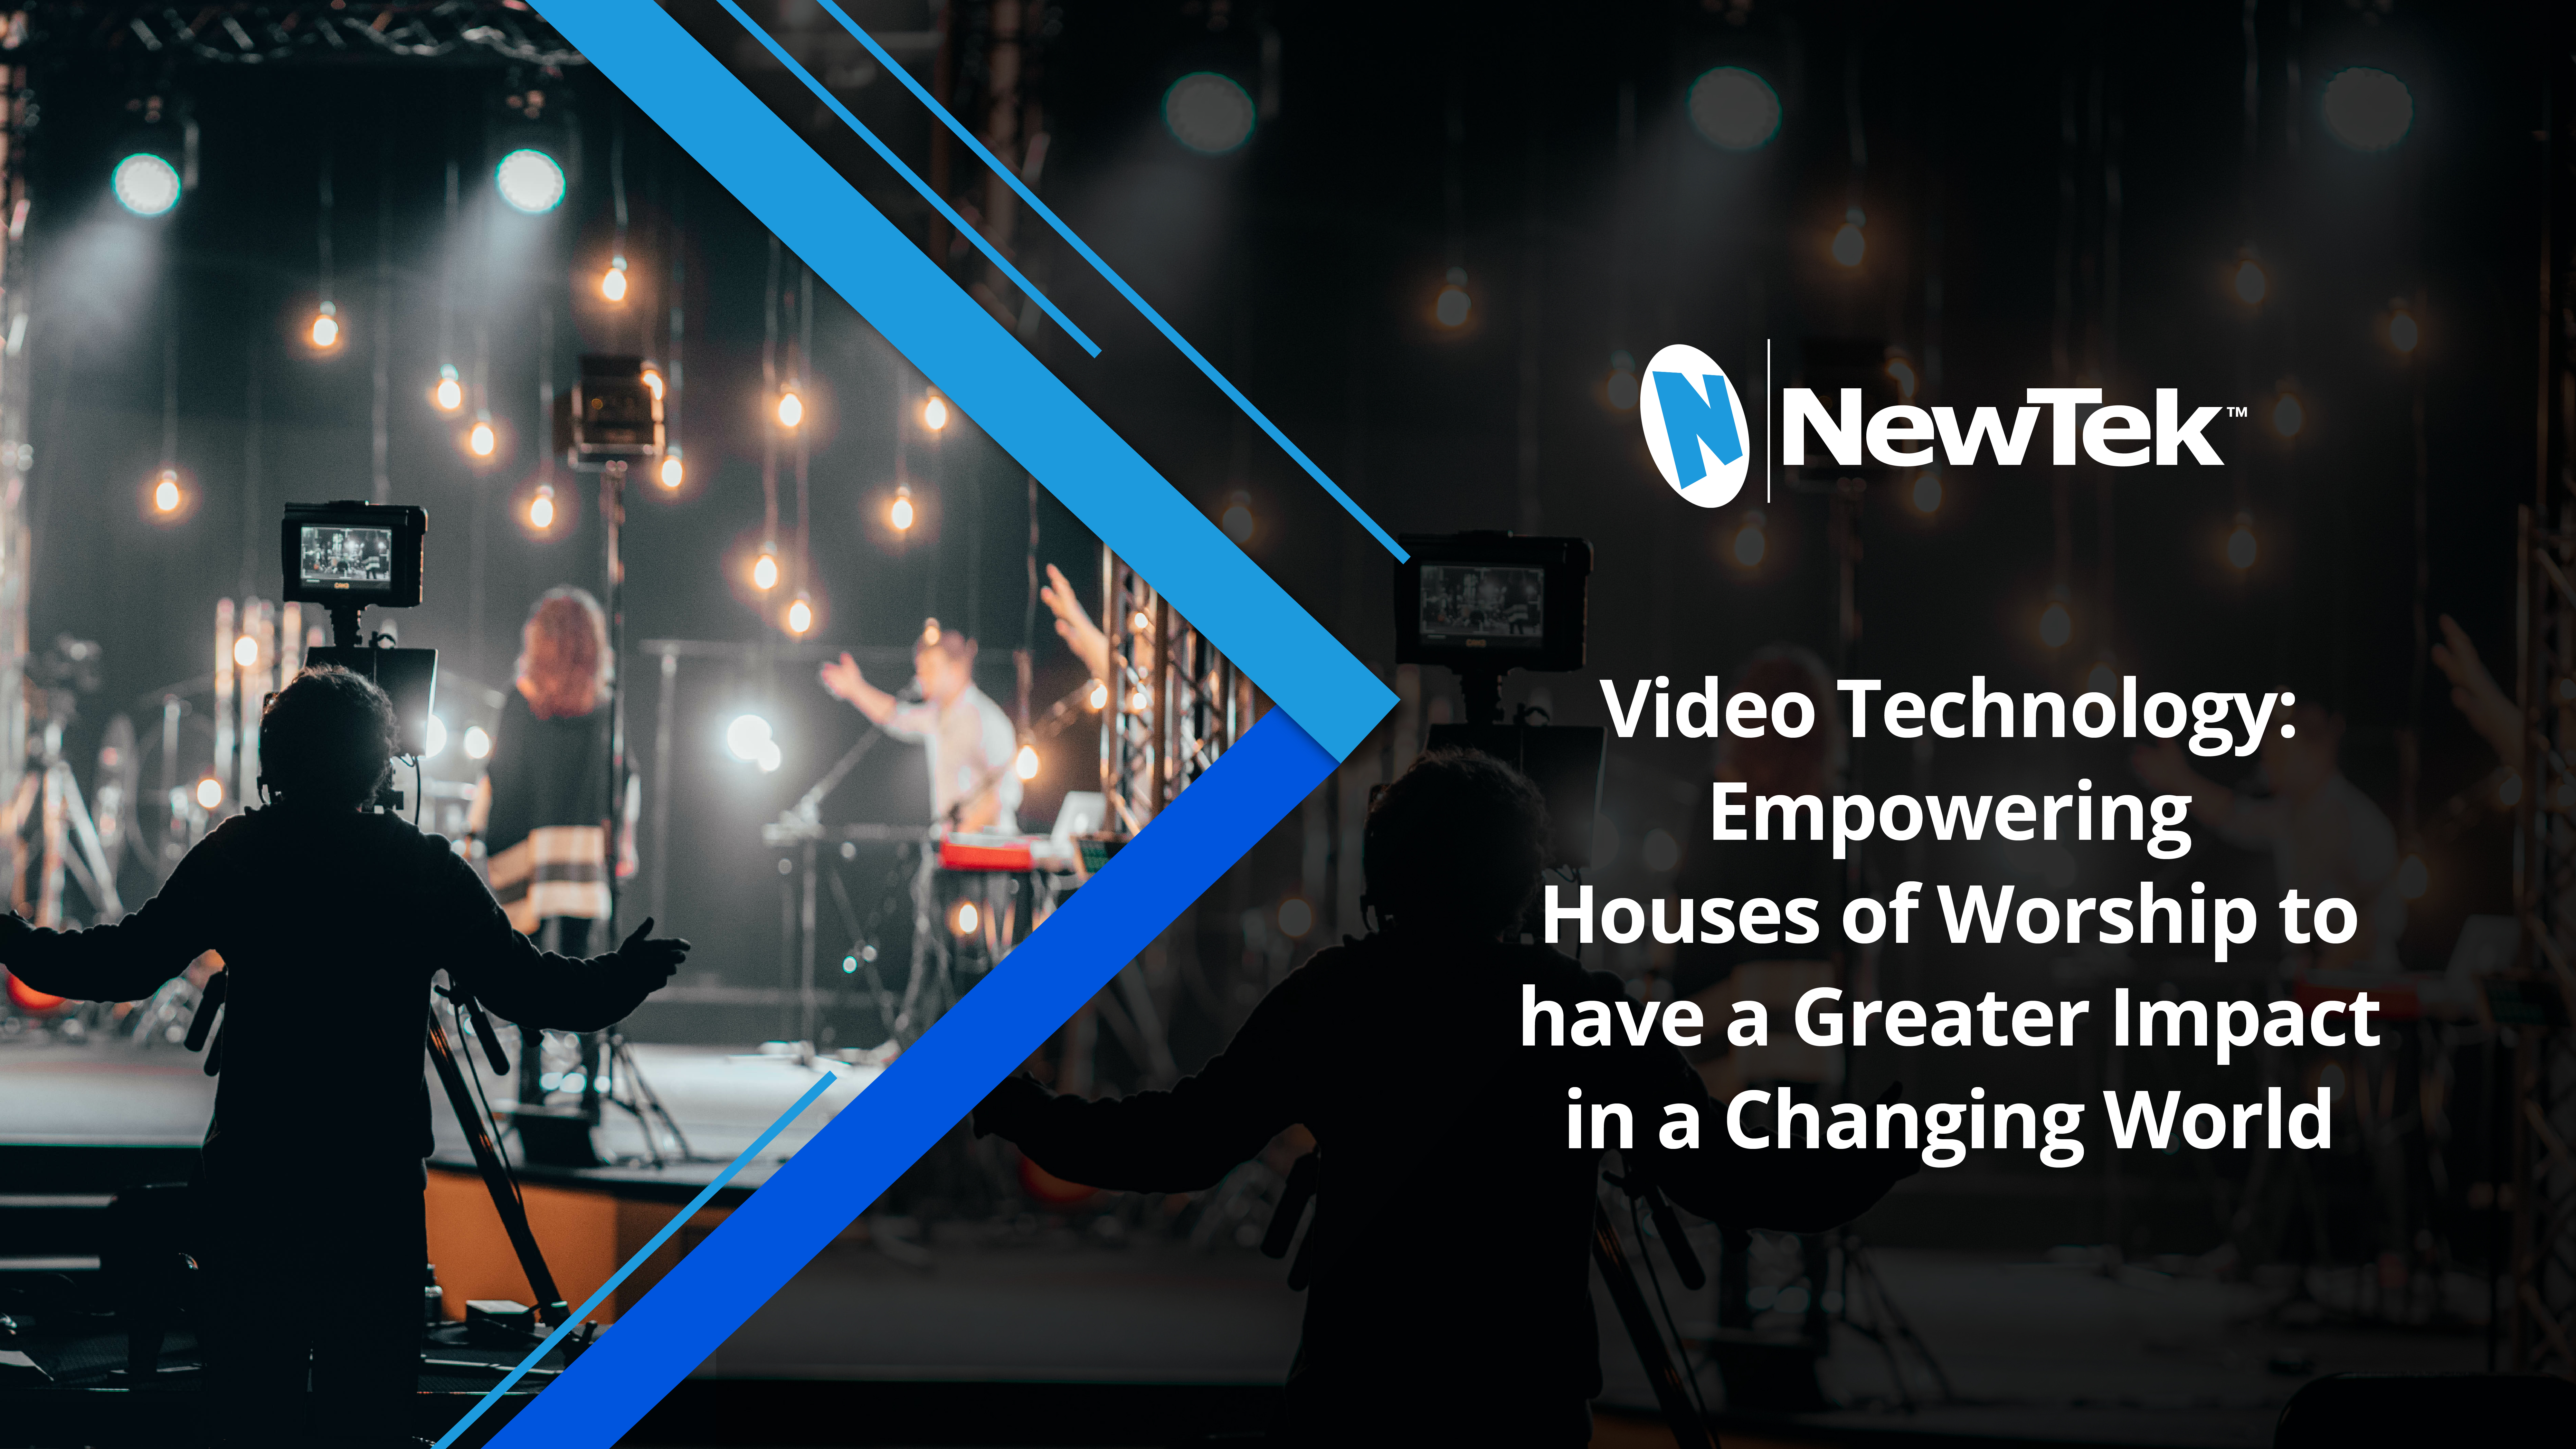 Video Technology: Empowering Houses of Worship to have a Greater Impact in a Changing World